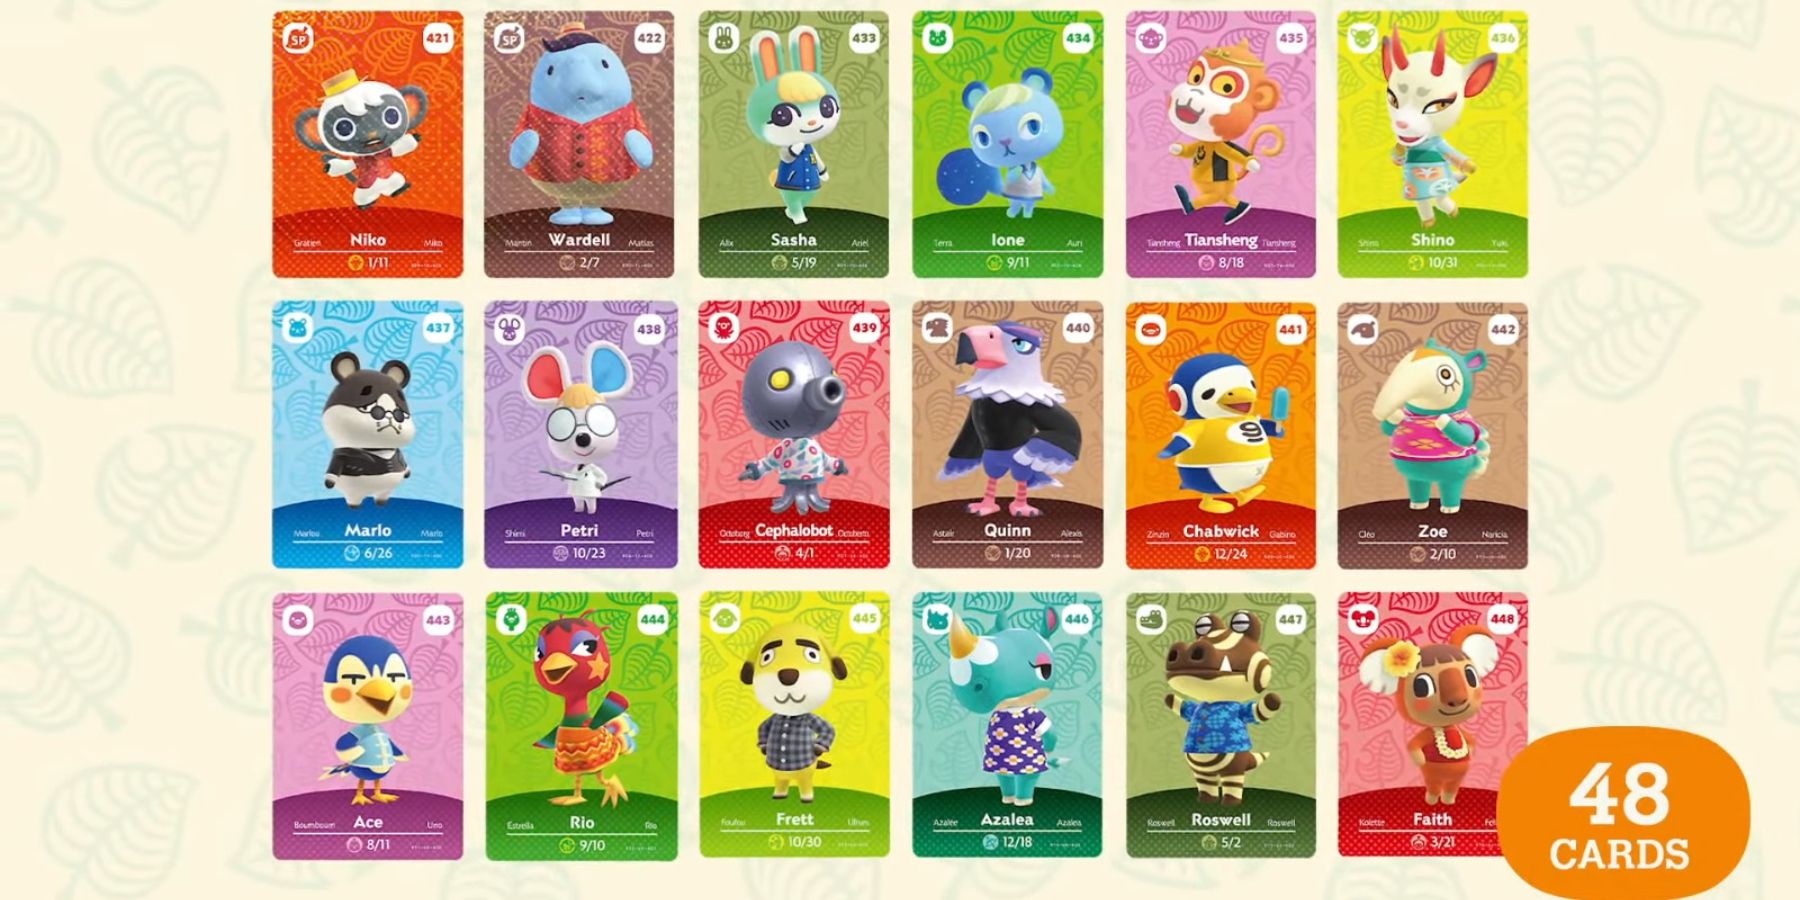 Animal Crossing Amiibo Cards Are Going for Ridiculous Prices Online